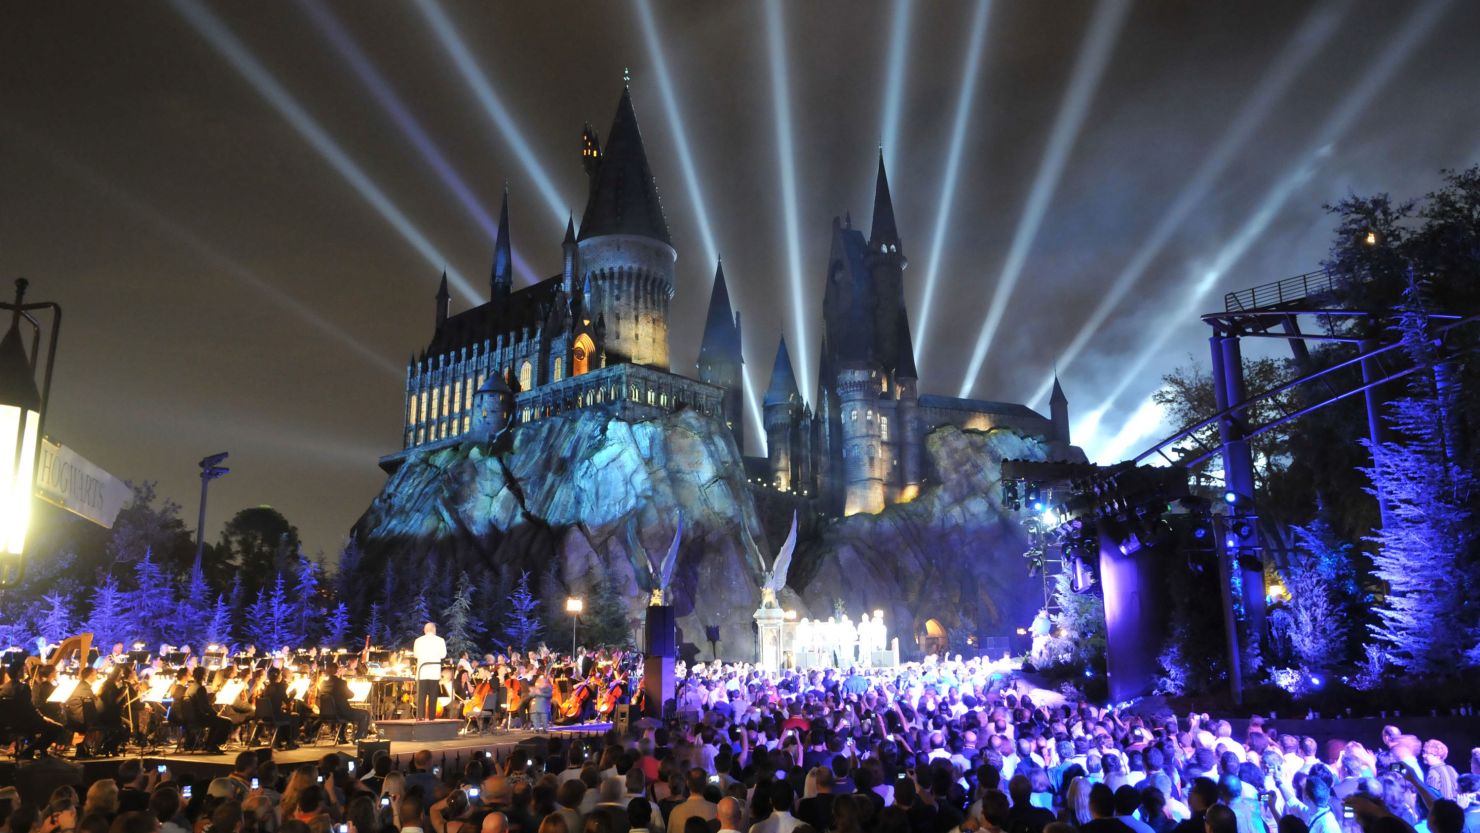 The first Harry Potter theme park opened in June 2010 at Universal Orlando. A park is opening in Hollywood next.